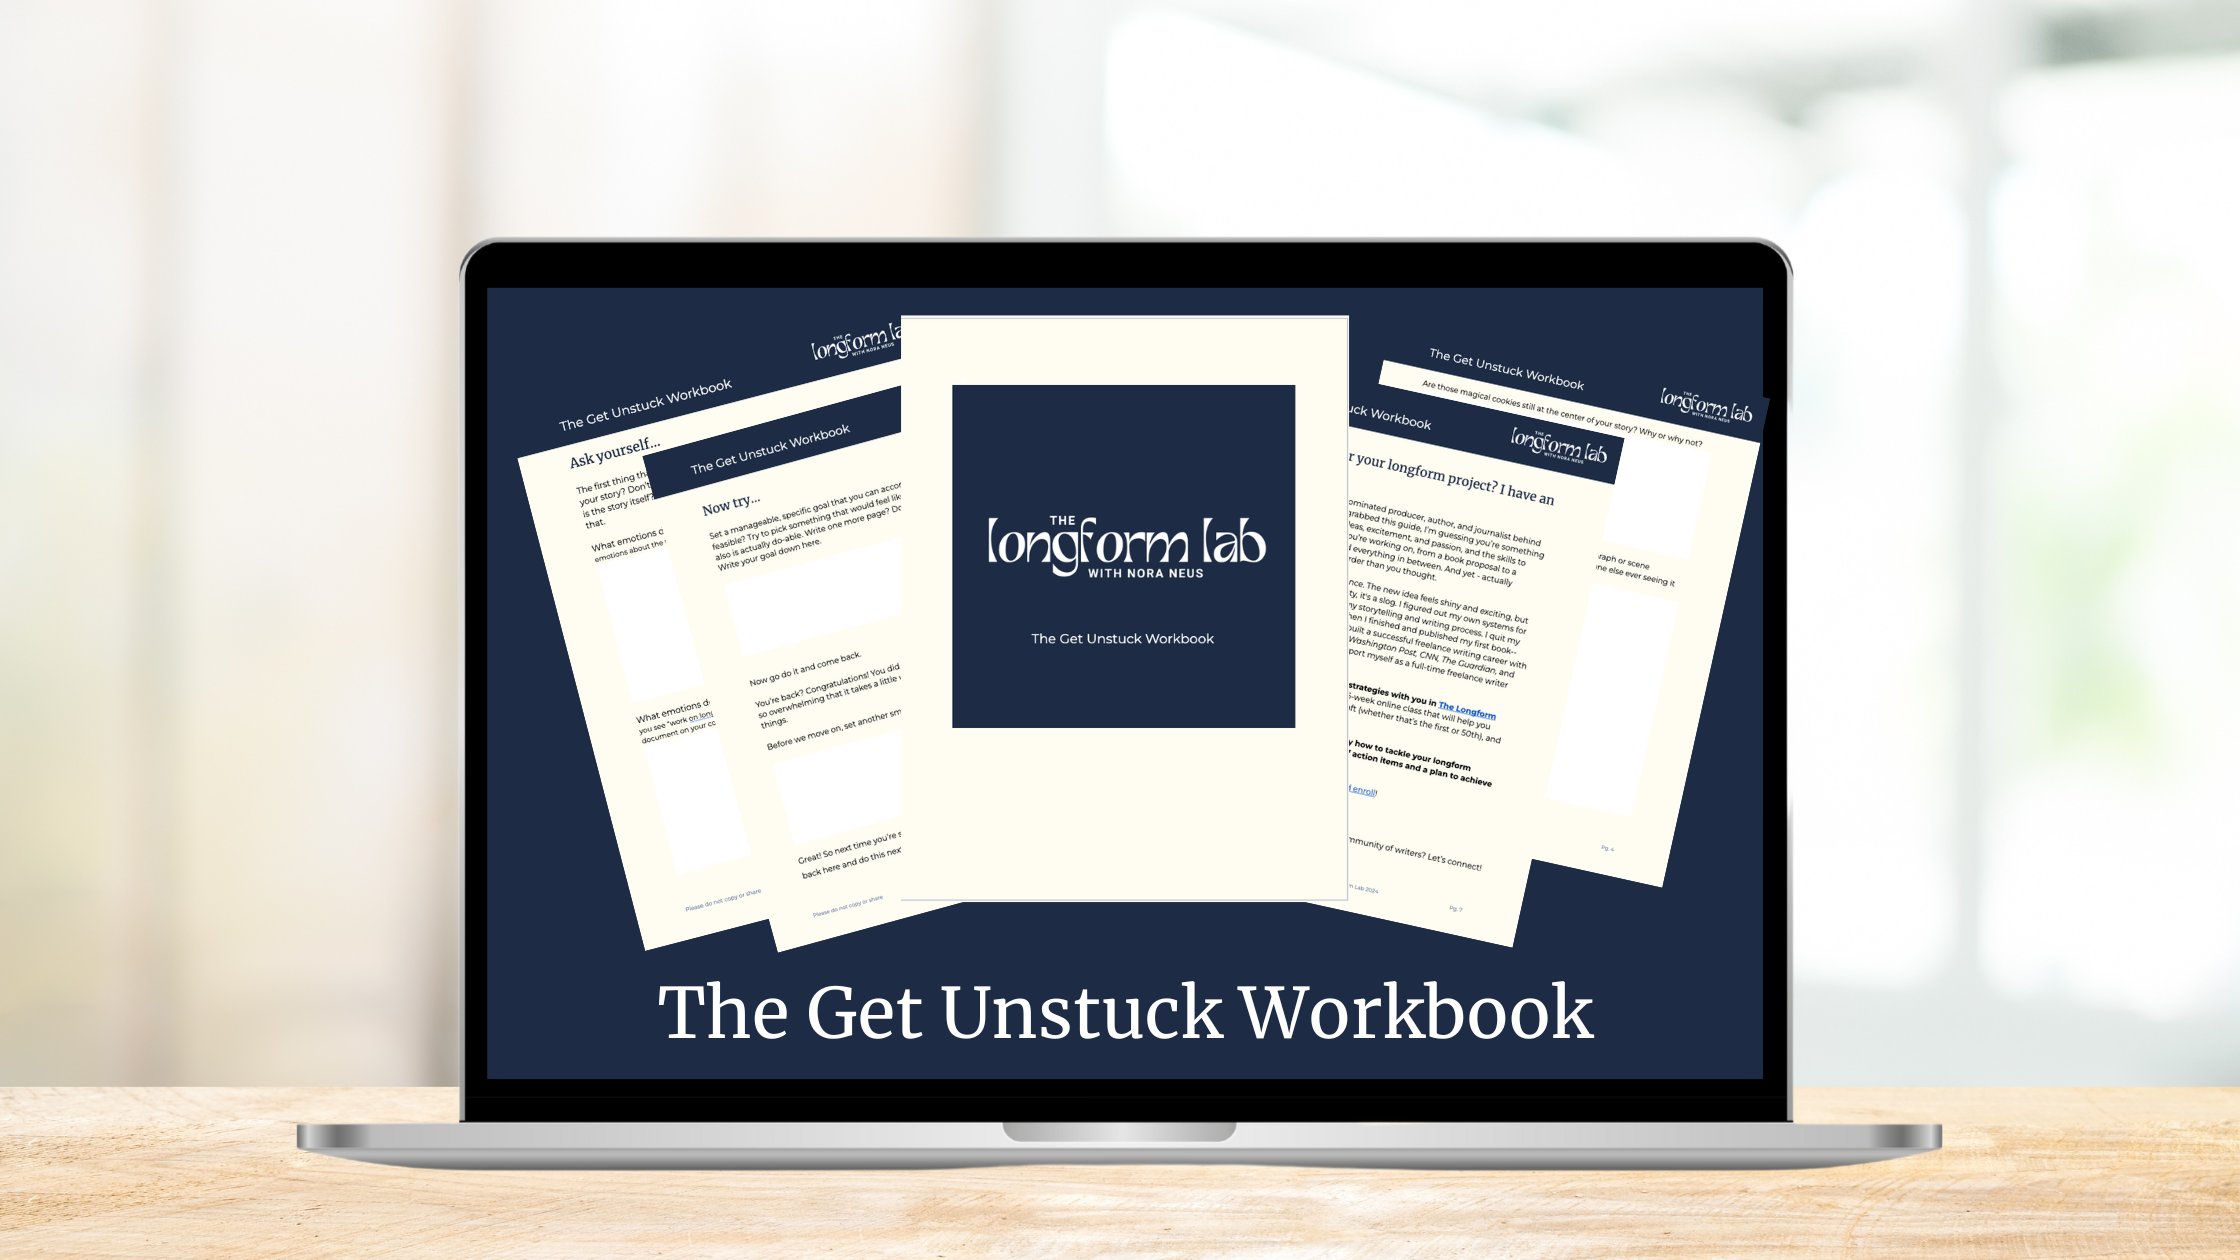 Laptop on a desk with a preview of the Get Unstuck Workbook on the screen.